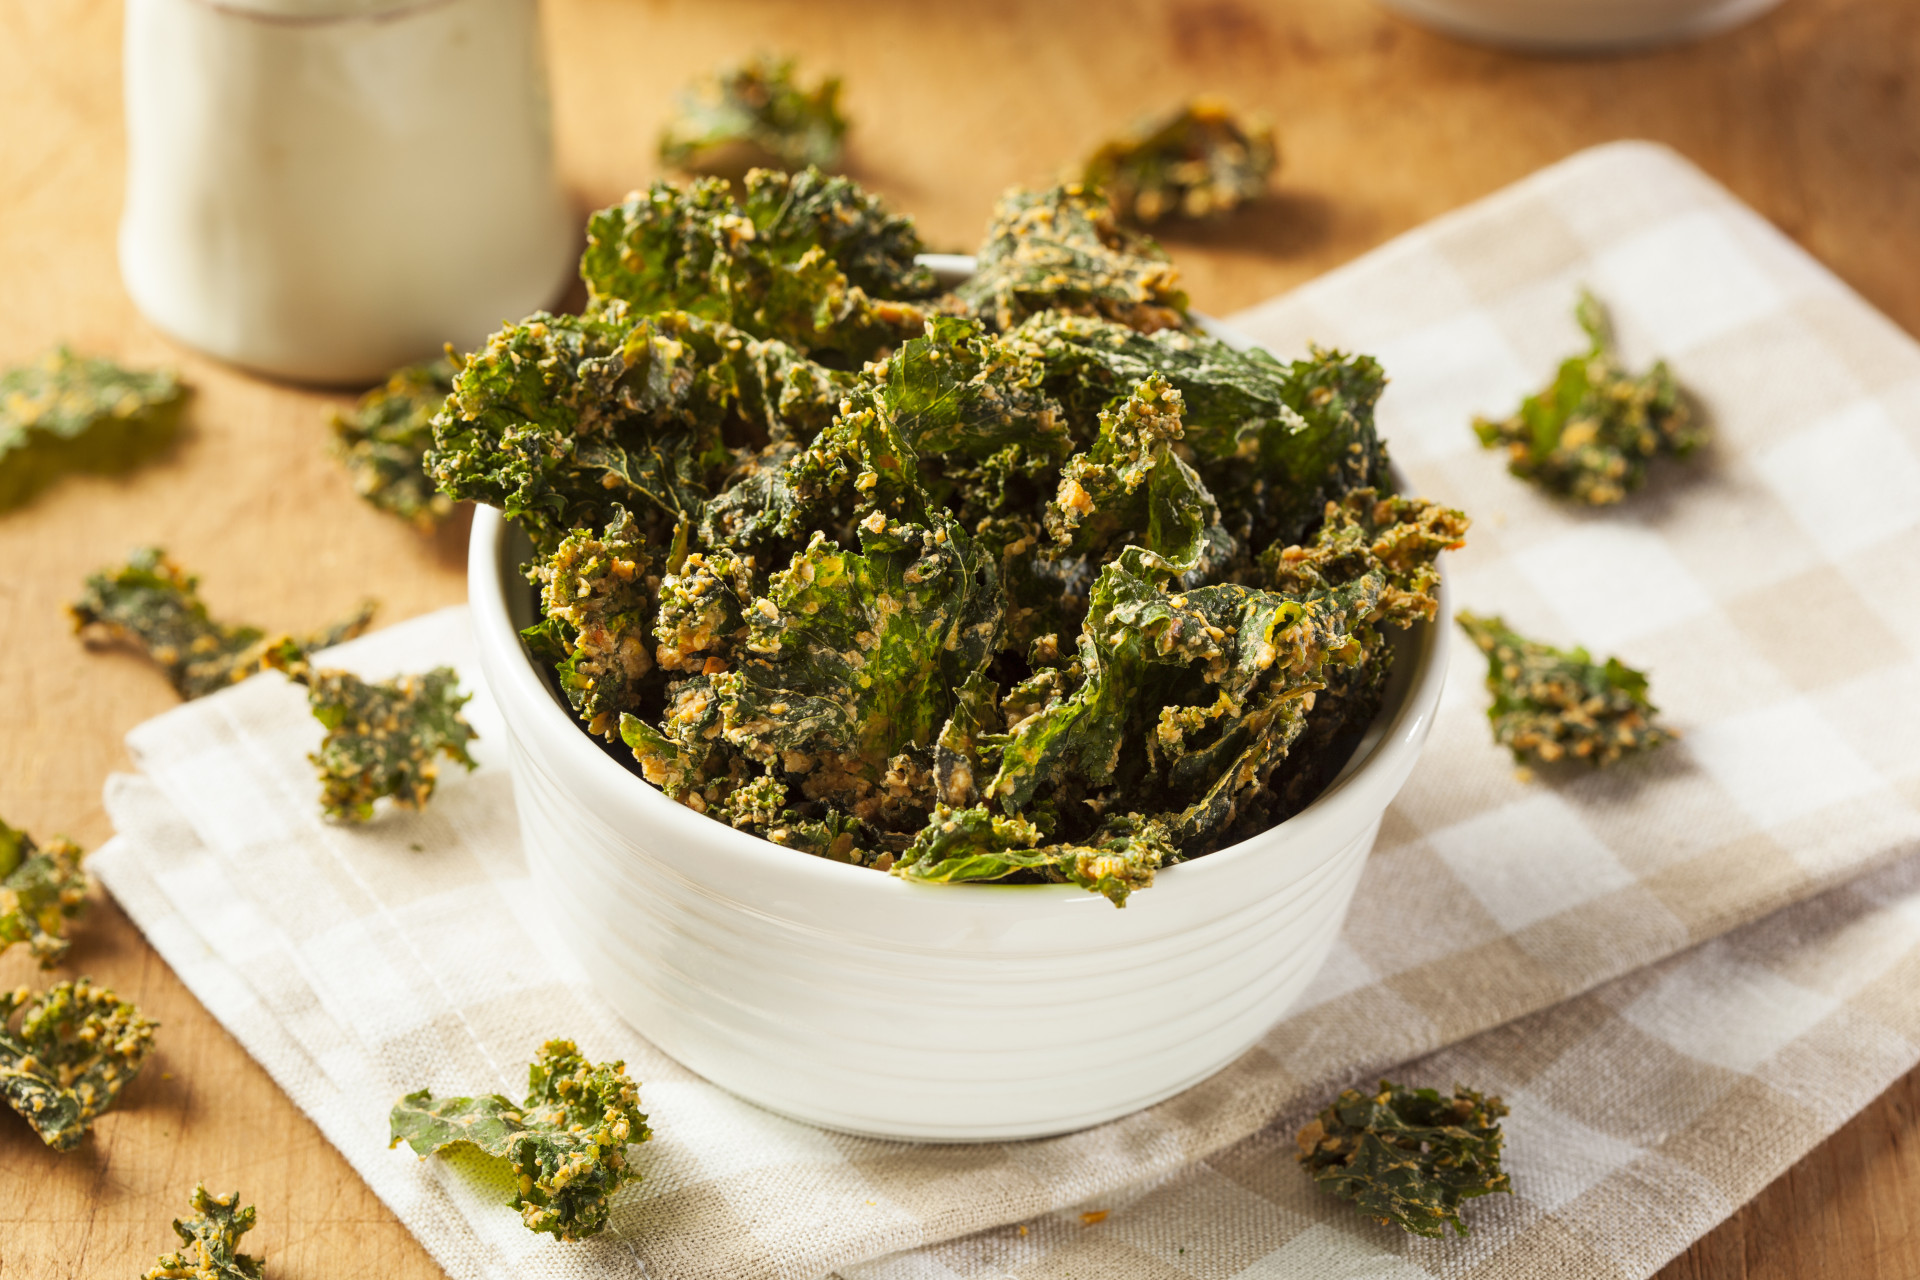 <p>Avoid potato chips and try these delicious, nutritious, and addictive kale chips. Kale doesn't lose its nutrition when air crisped, so you're getting all the superfood benefits <em>and</em> the satisfying crunch.</p><p><a href="https://www.msn.com/en-us/community/channel/vid-7xx8mnucu55yw63we9va2gwr7uihbxwc68fxqp25x6tg4ftibpra?cvid=94631541bc0f4f89bfd59158d696ad7e">Follow us and access great exclusive content every day</a></p>